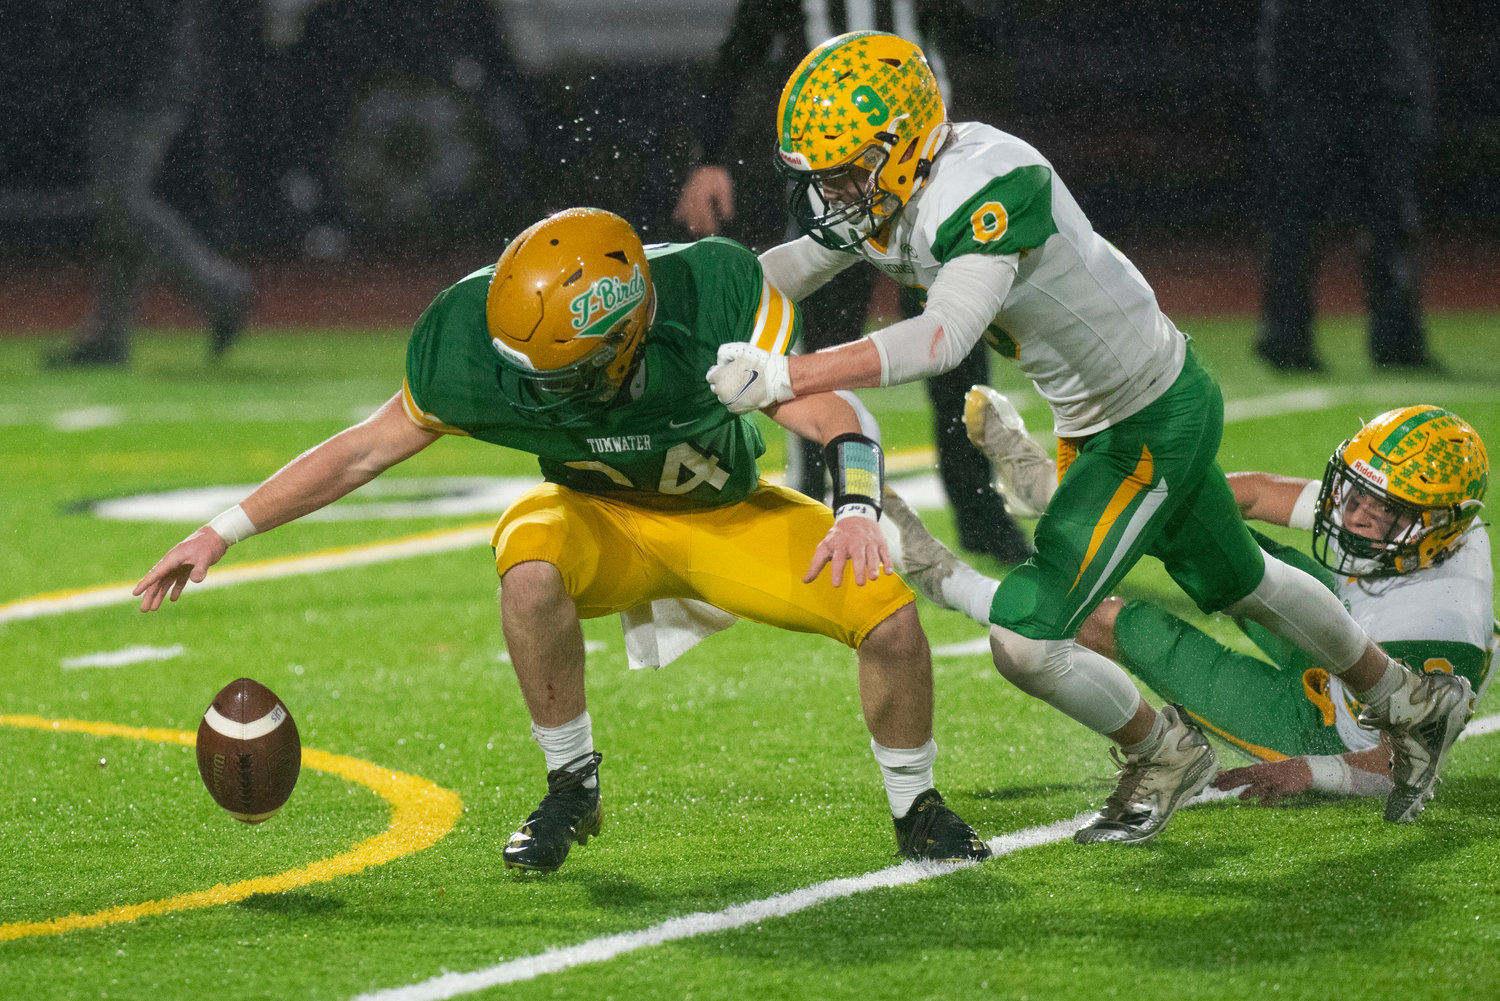 Tumwater’s Payton Hoyt looks to corral a Lynden punt as Lynden’s Ryan Kleindel (9) hits him during the 2A state title game on Dec. 4.